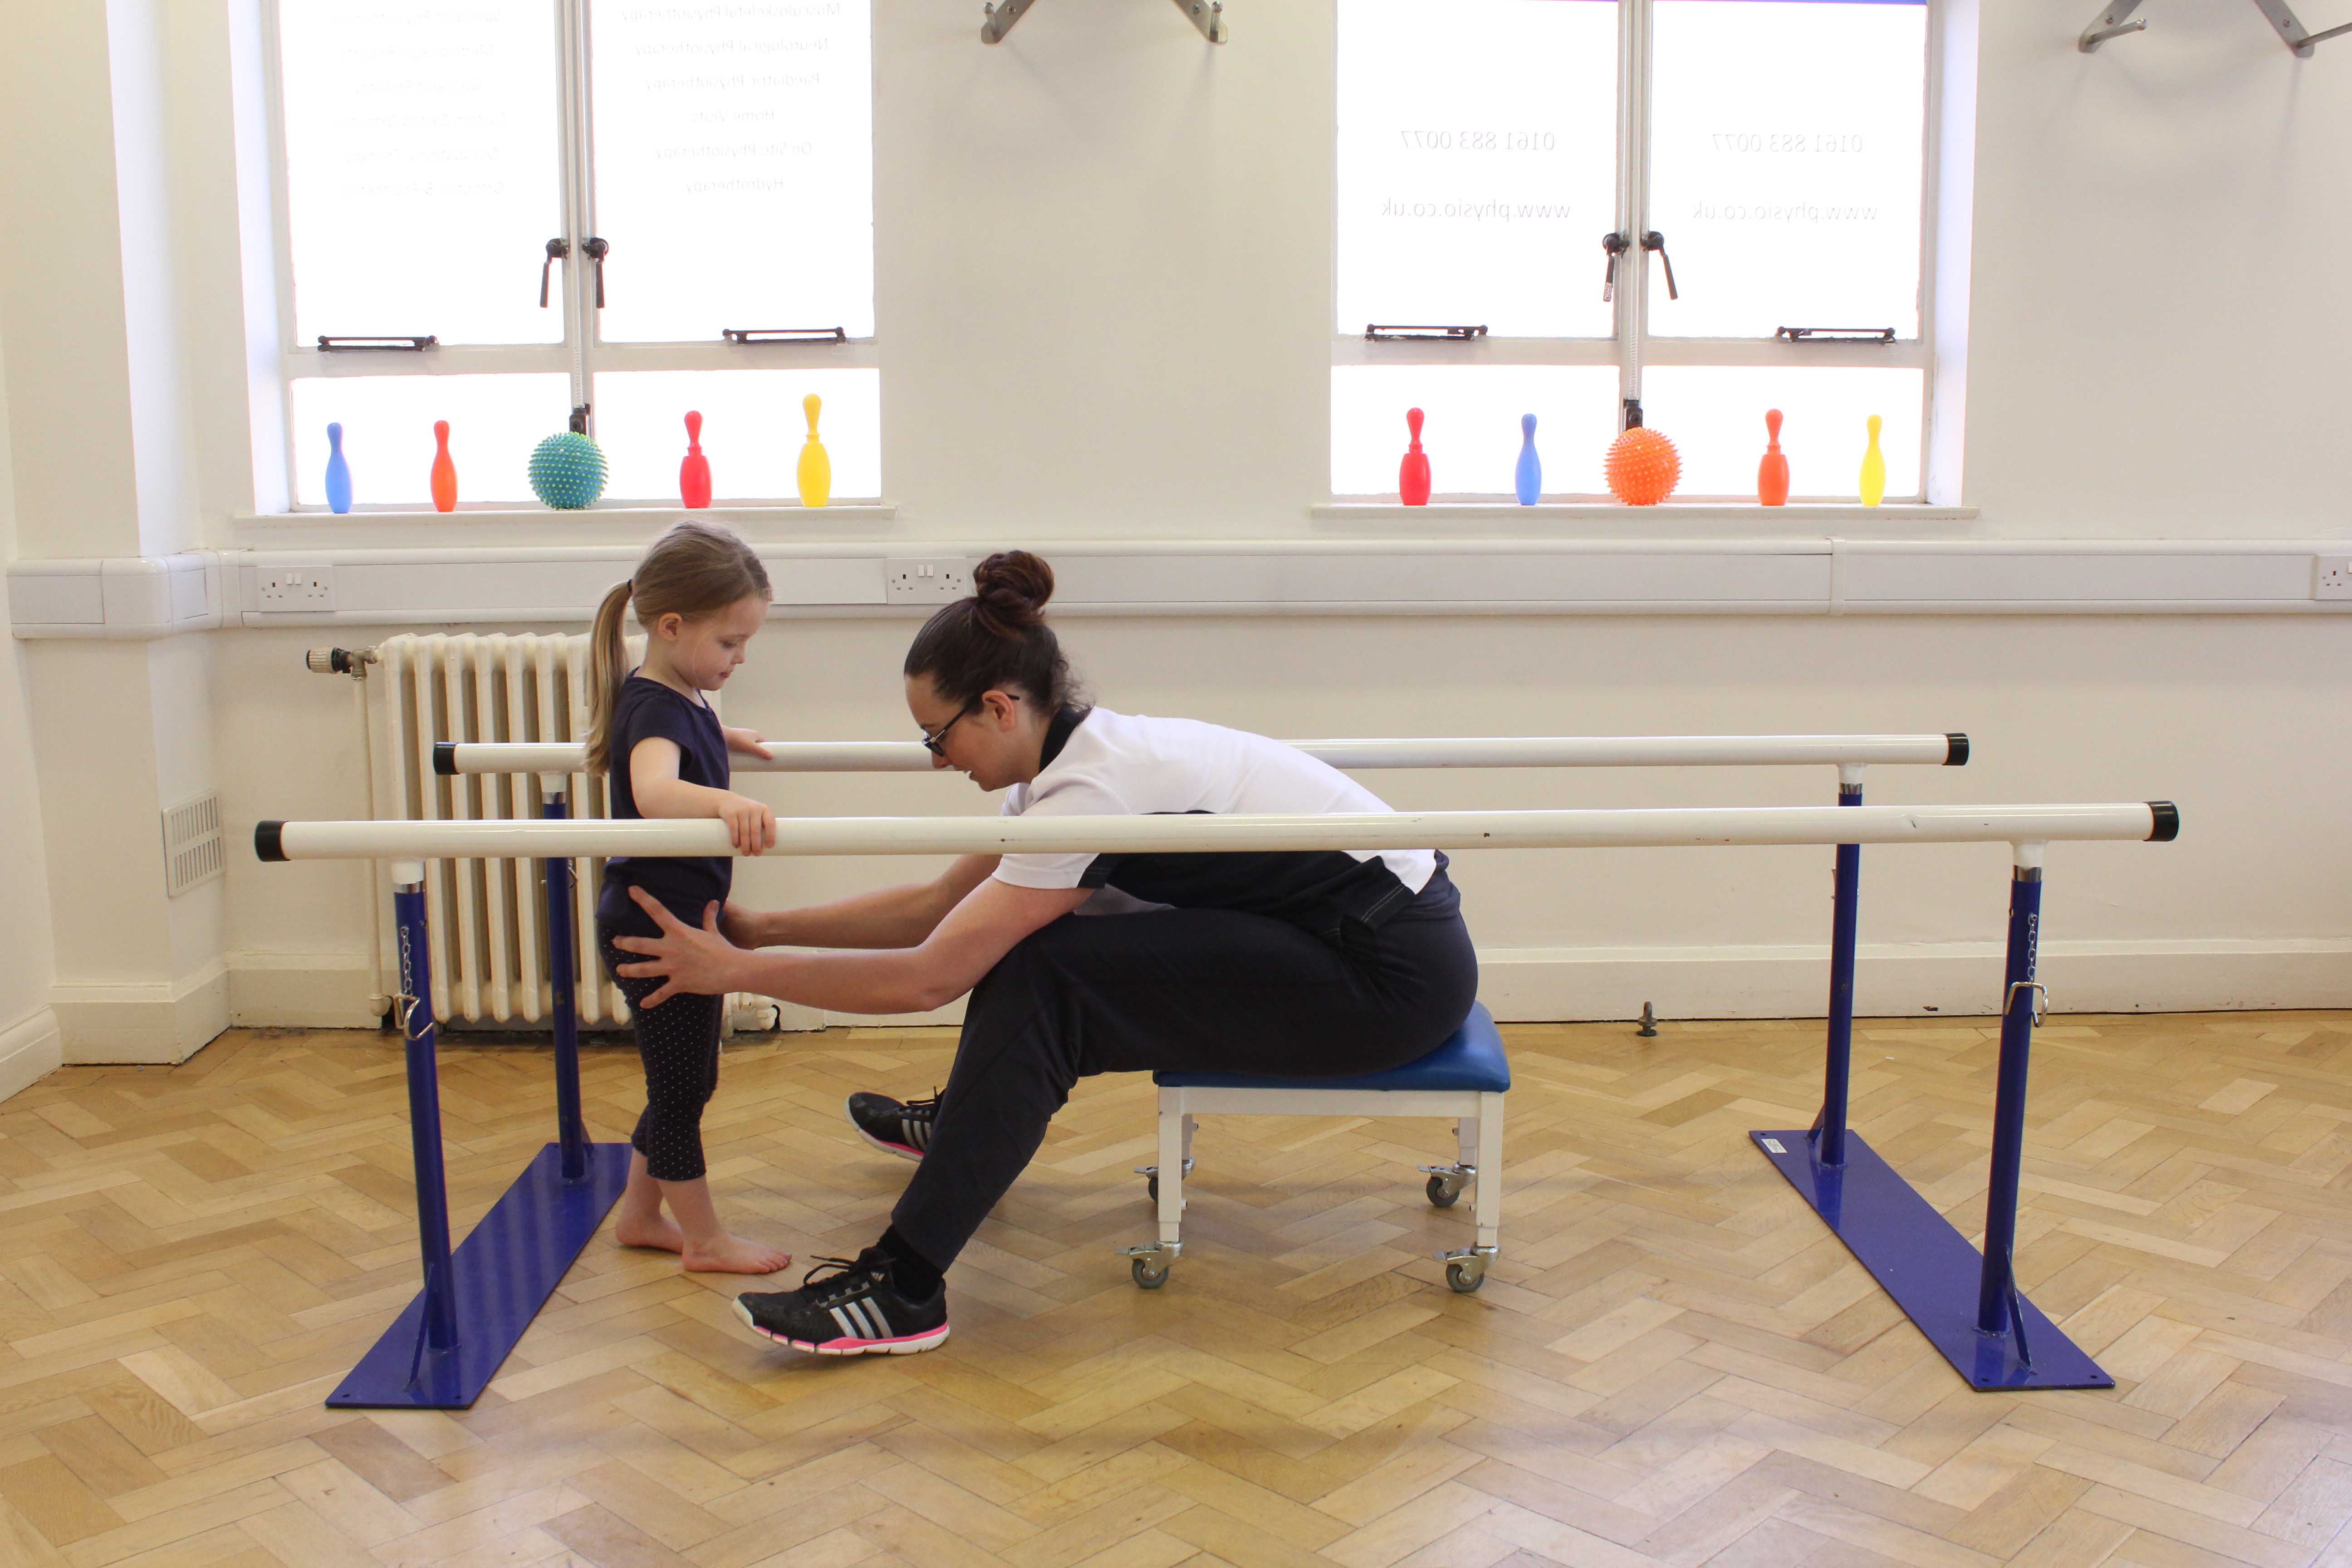 Mobility exercises between the parallel bars supervised by an experienced physiotherapist